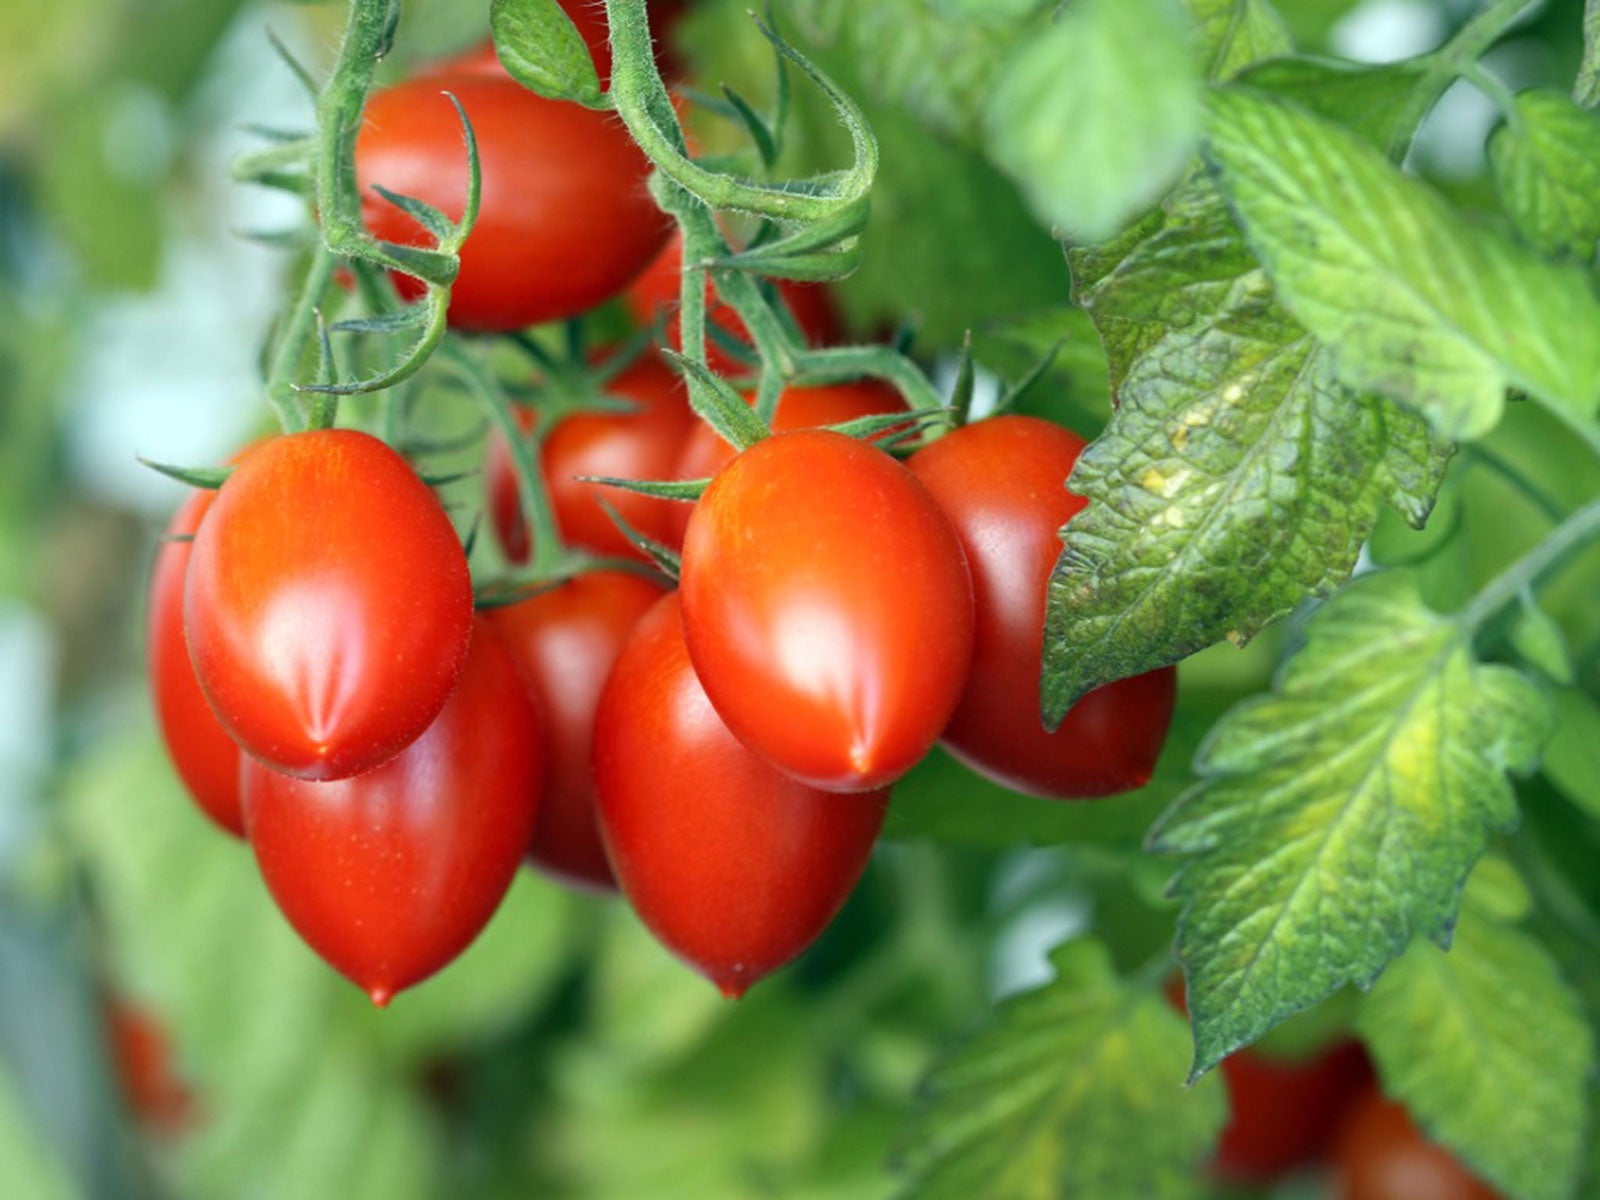 New way to plant tomatoes in your garden